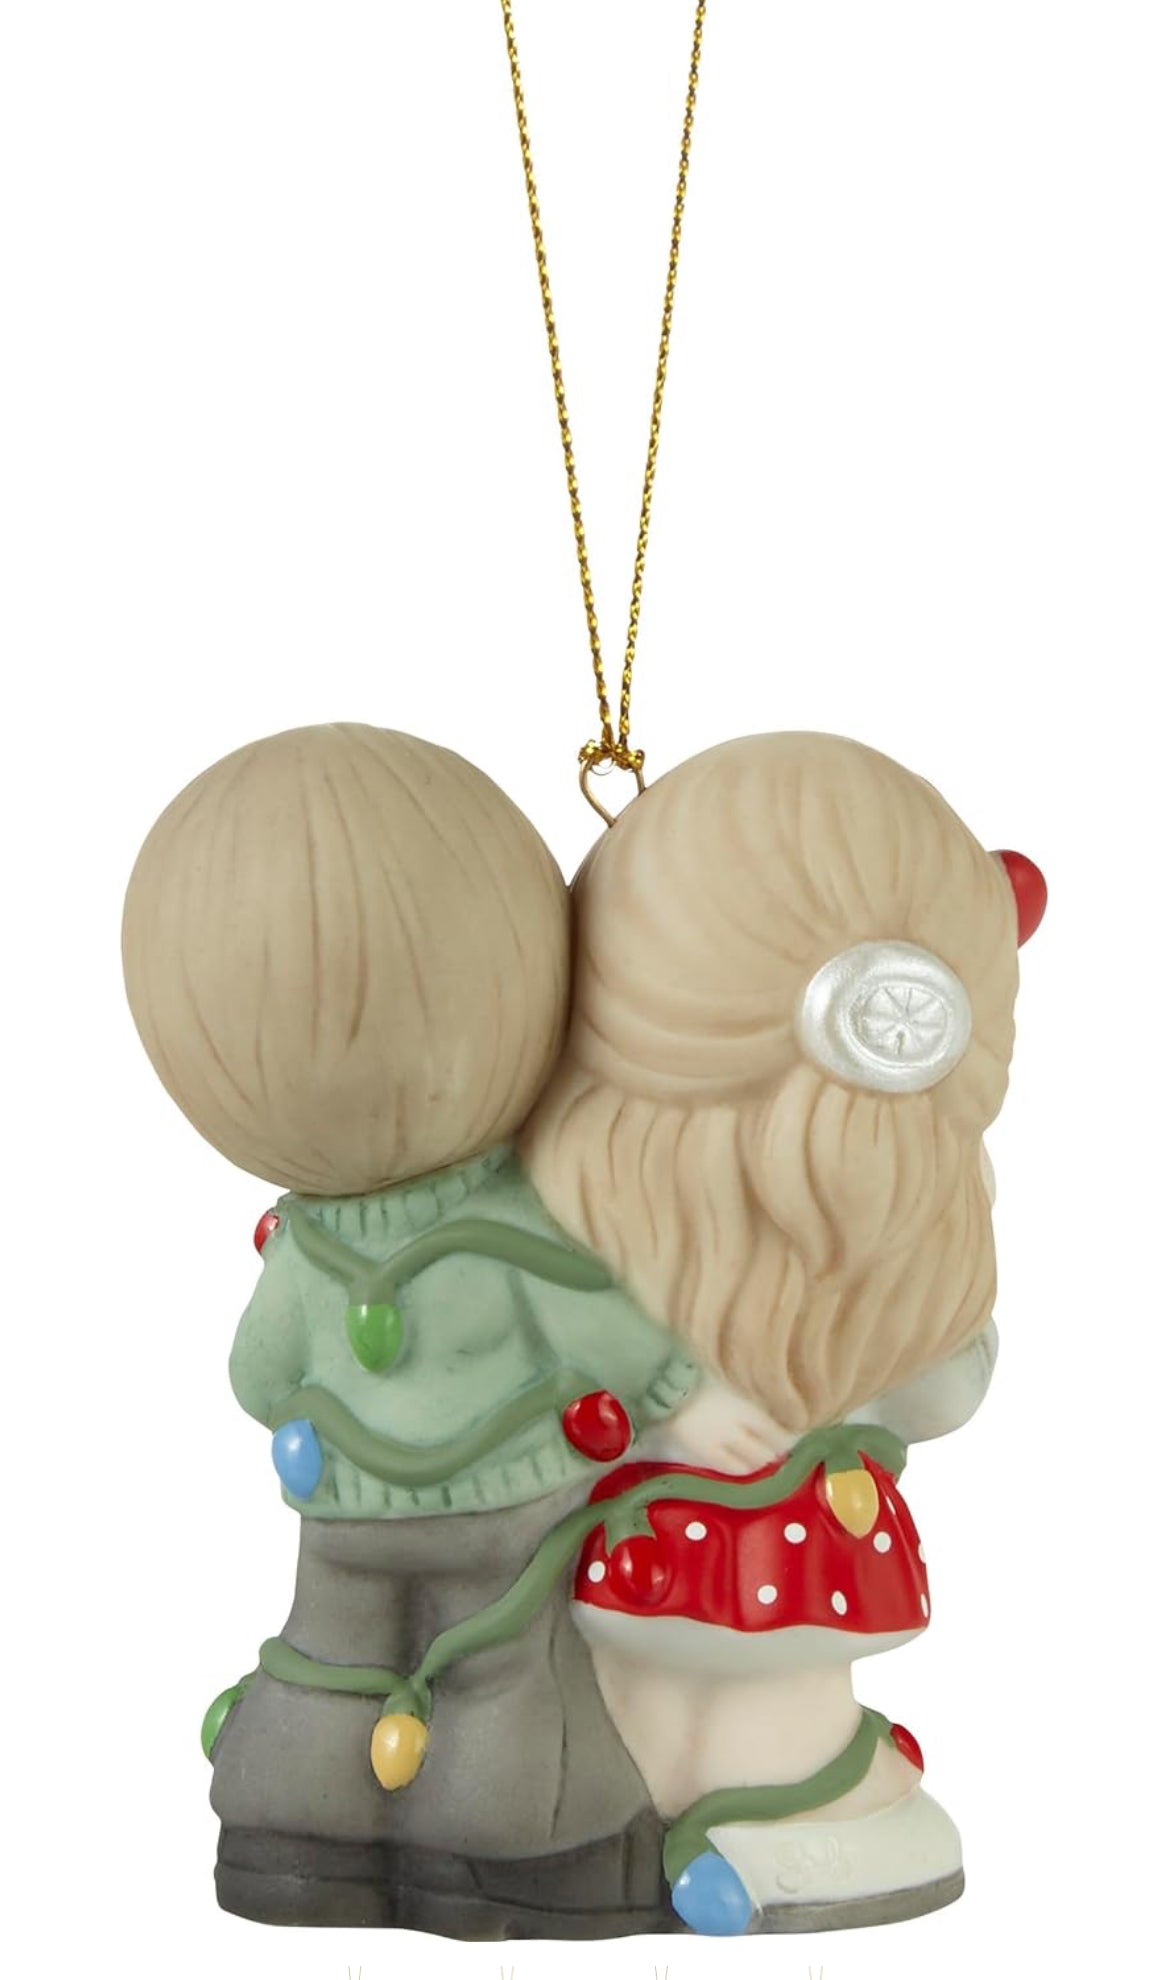 Our First Christmas Together 2023 - Precious Moment Ornament